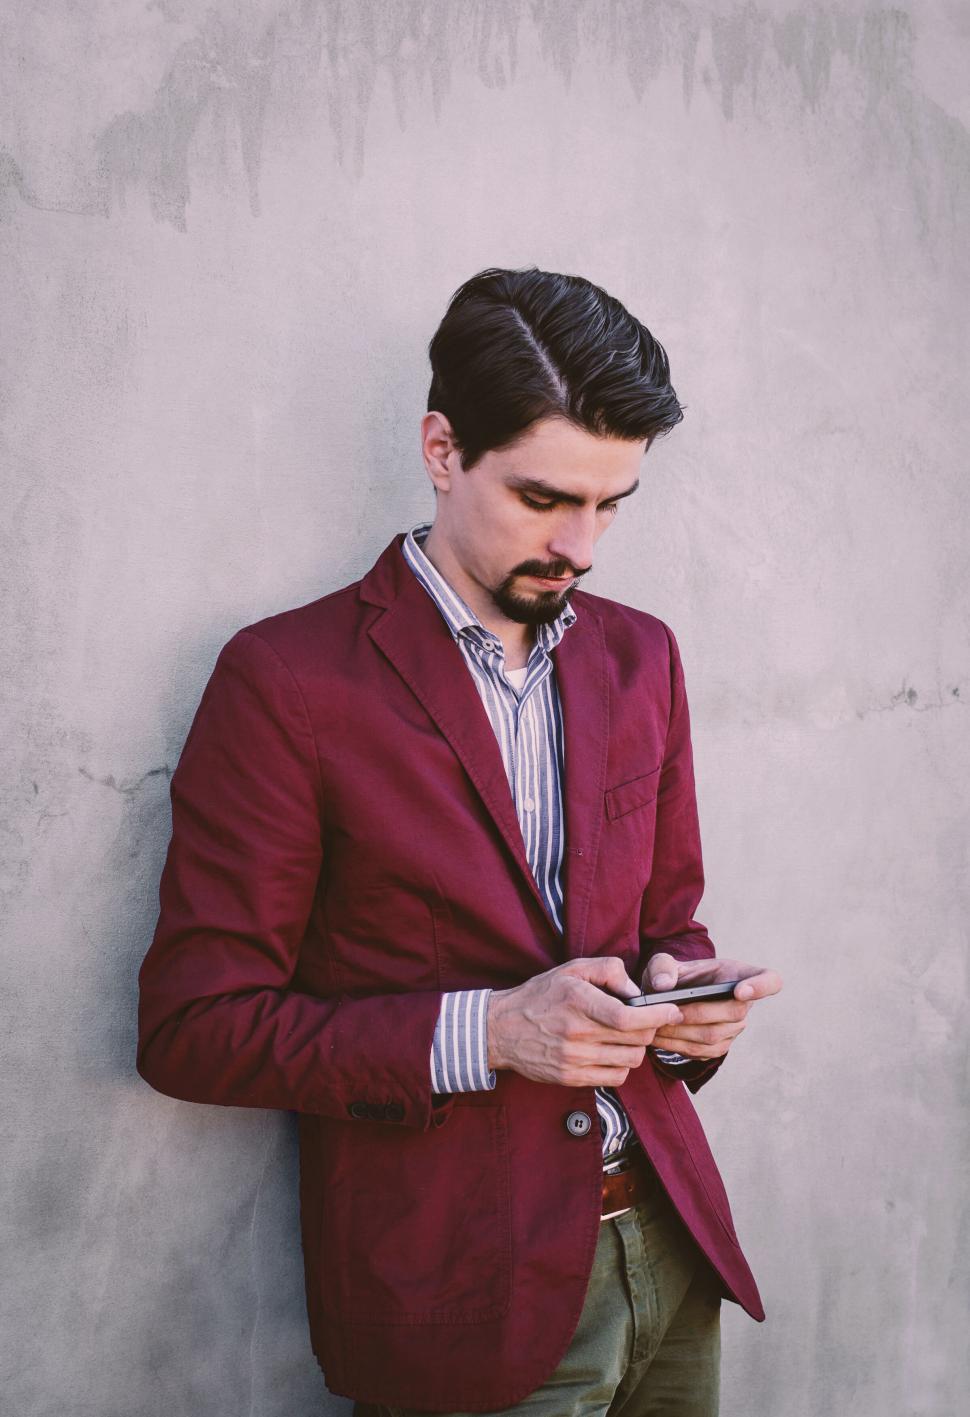 Free Image of Man in red jacket texting on phone 